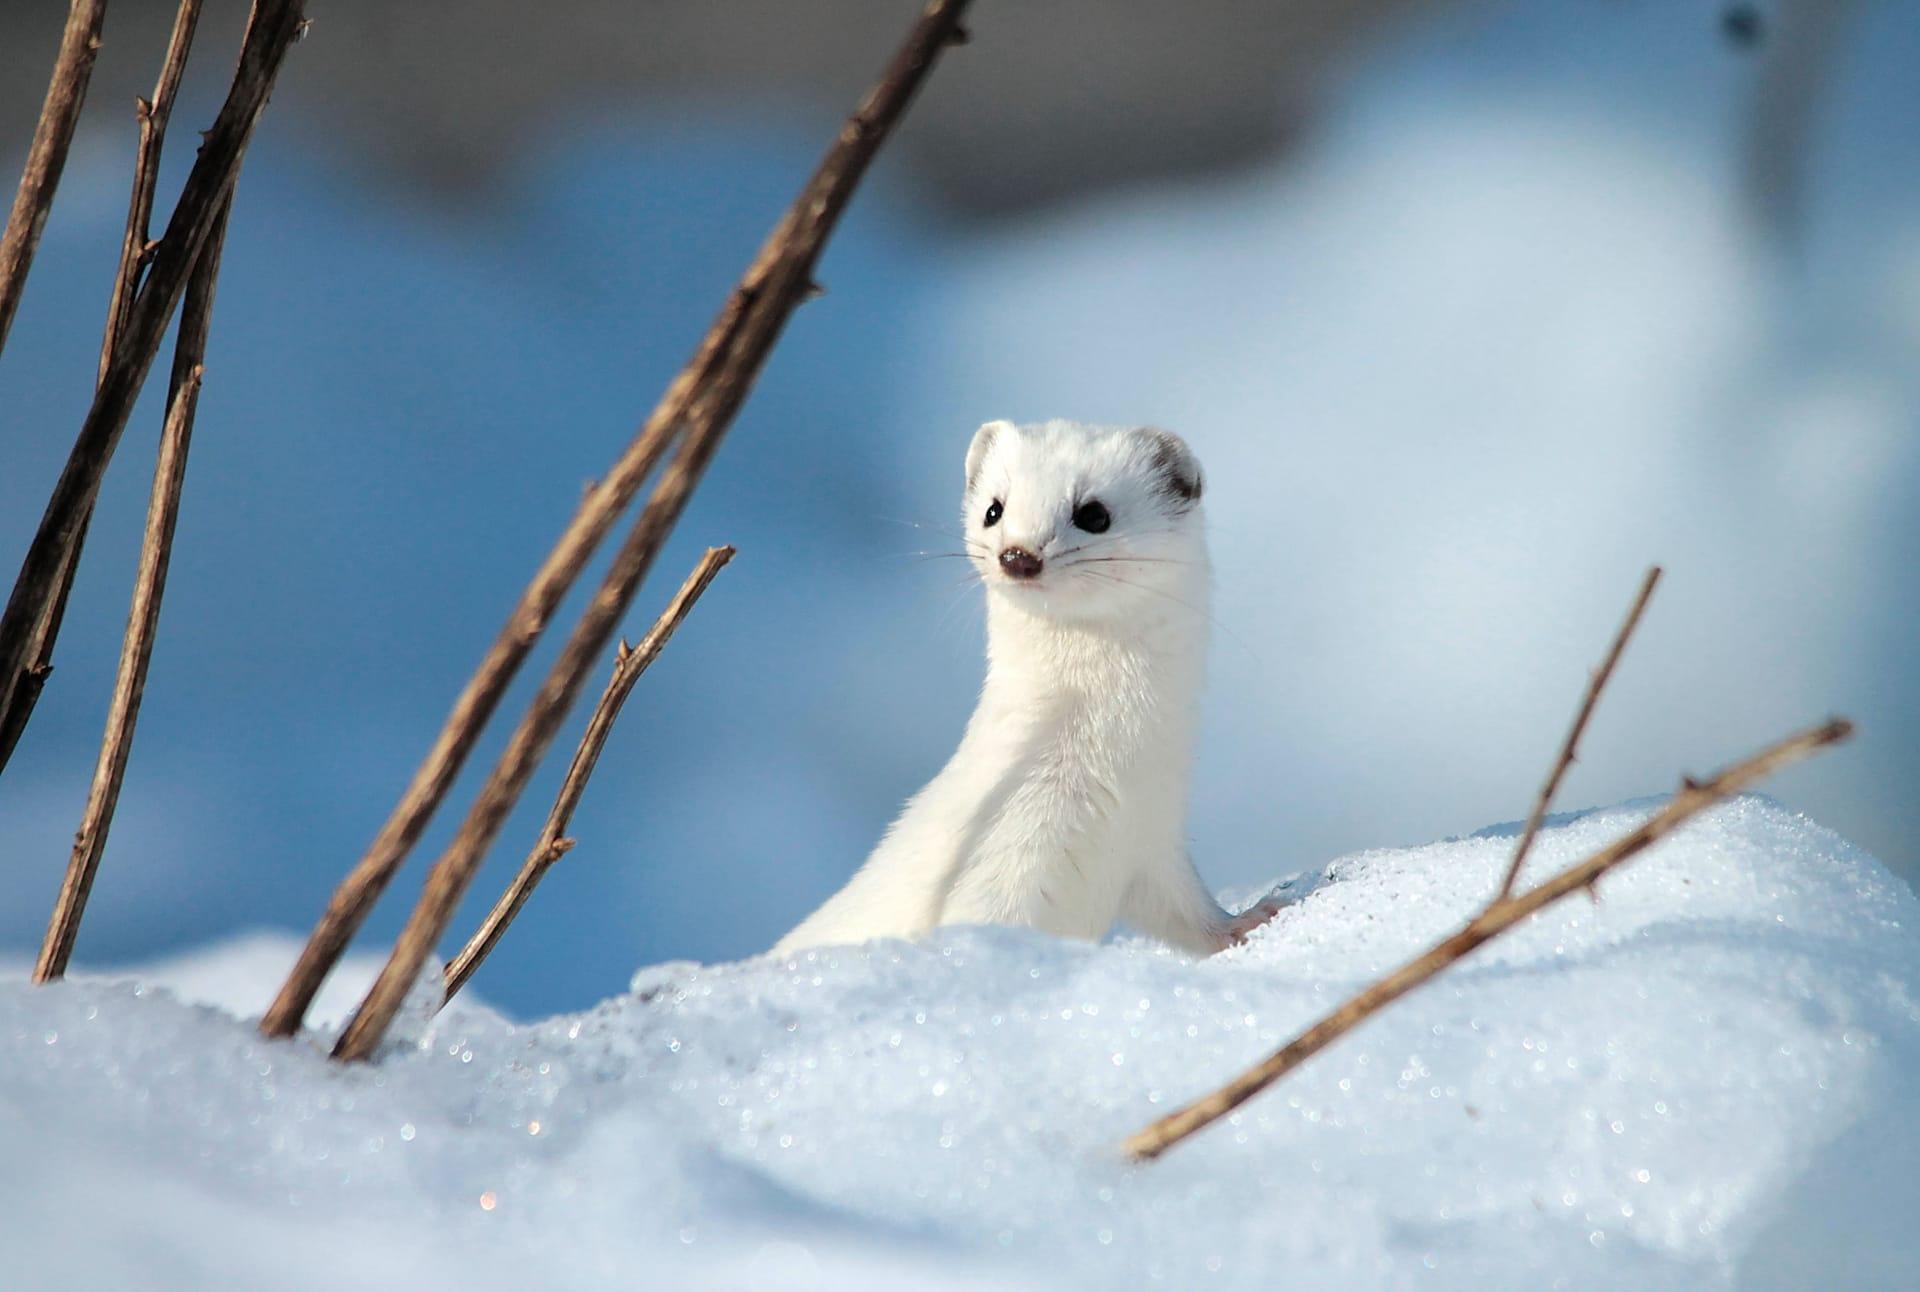 Weasel pictures